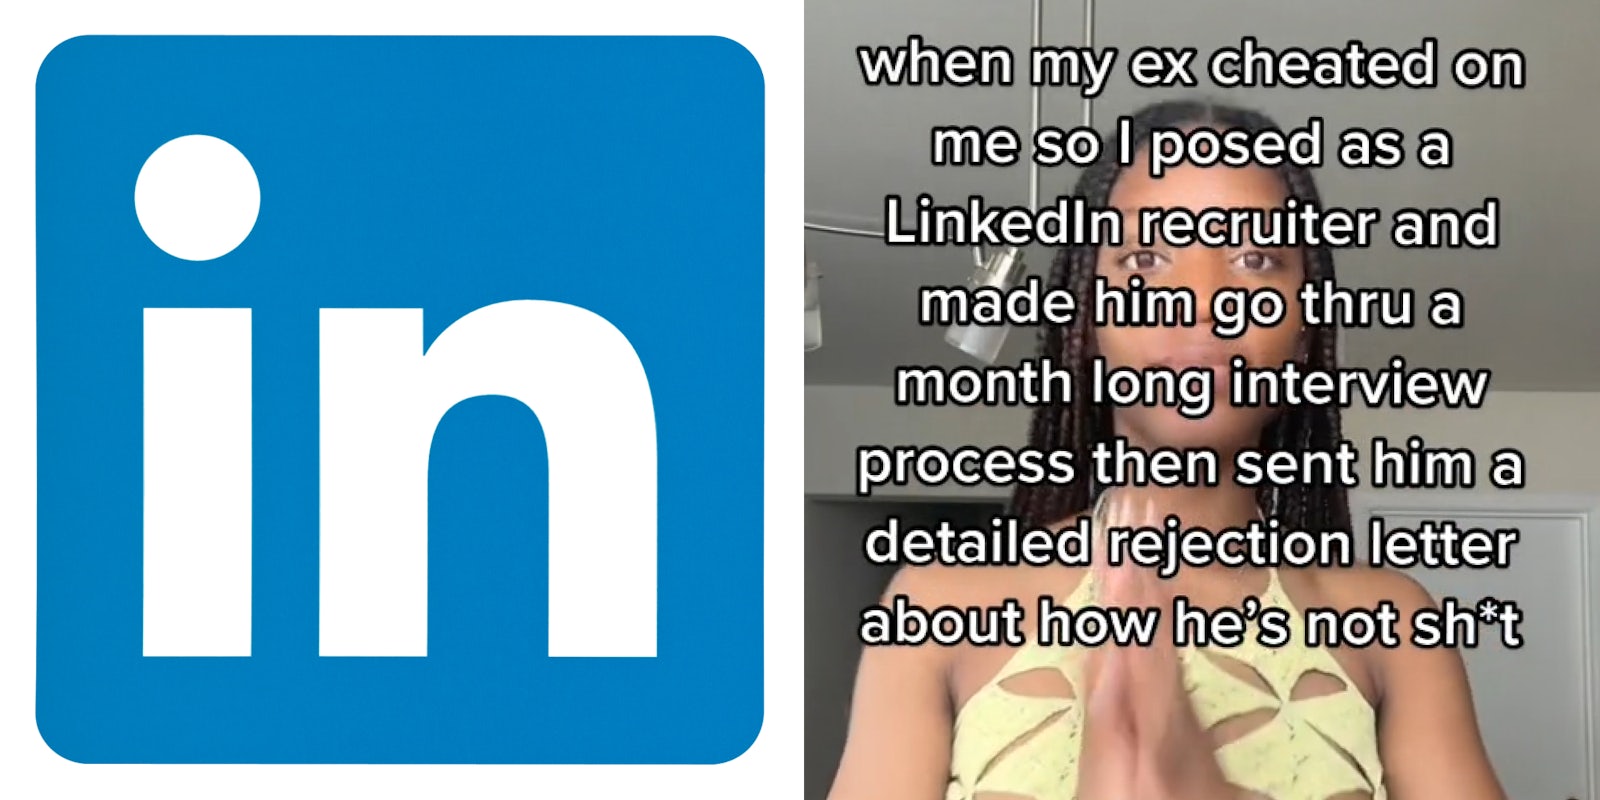 LinkedIn logo on white background (l) woman hands together caption 'when my ex cheated on me so I posted as a LinkedIn recruiter an d made him go thru a month long interview process then sent him a detailed rejection letter about how he's not shit' (r)